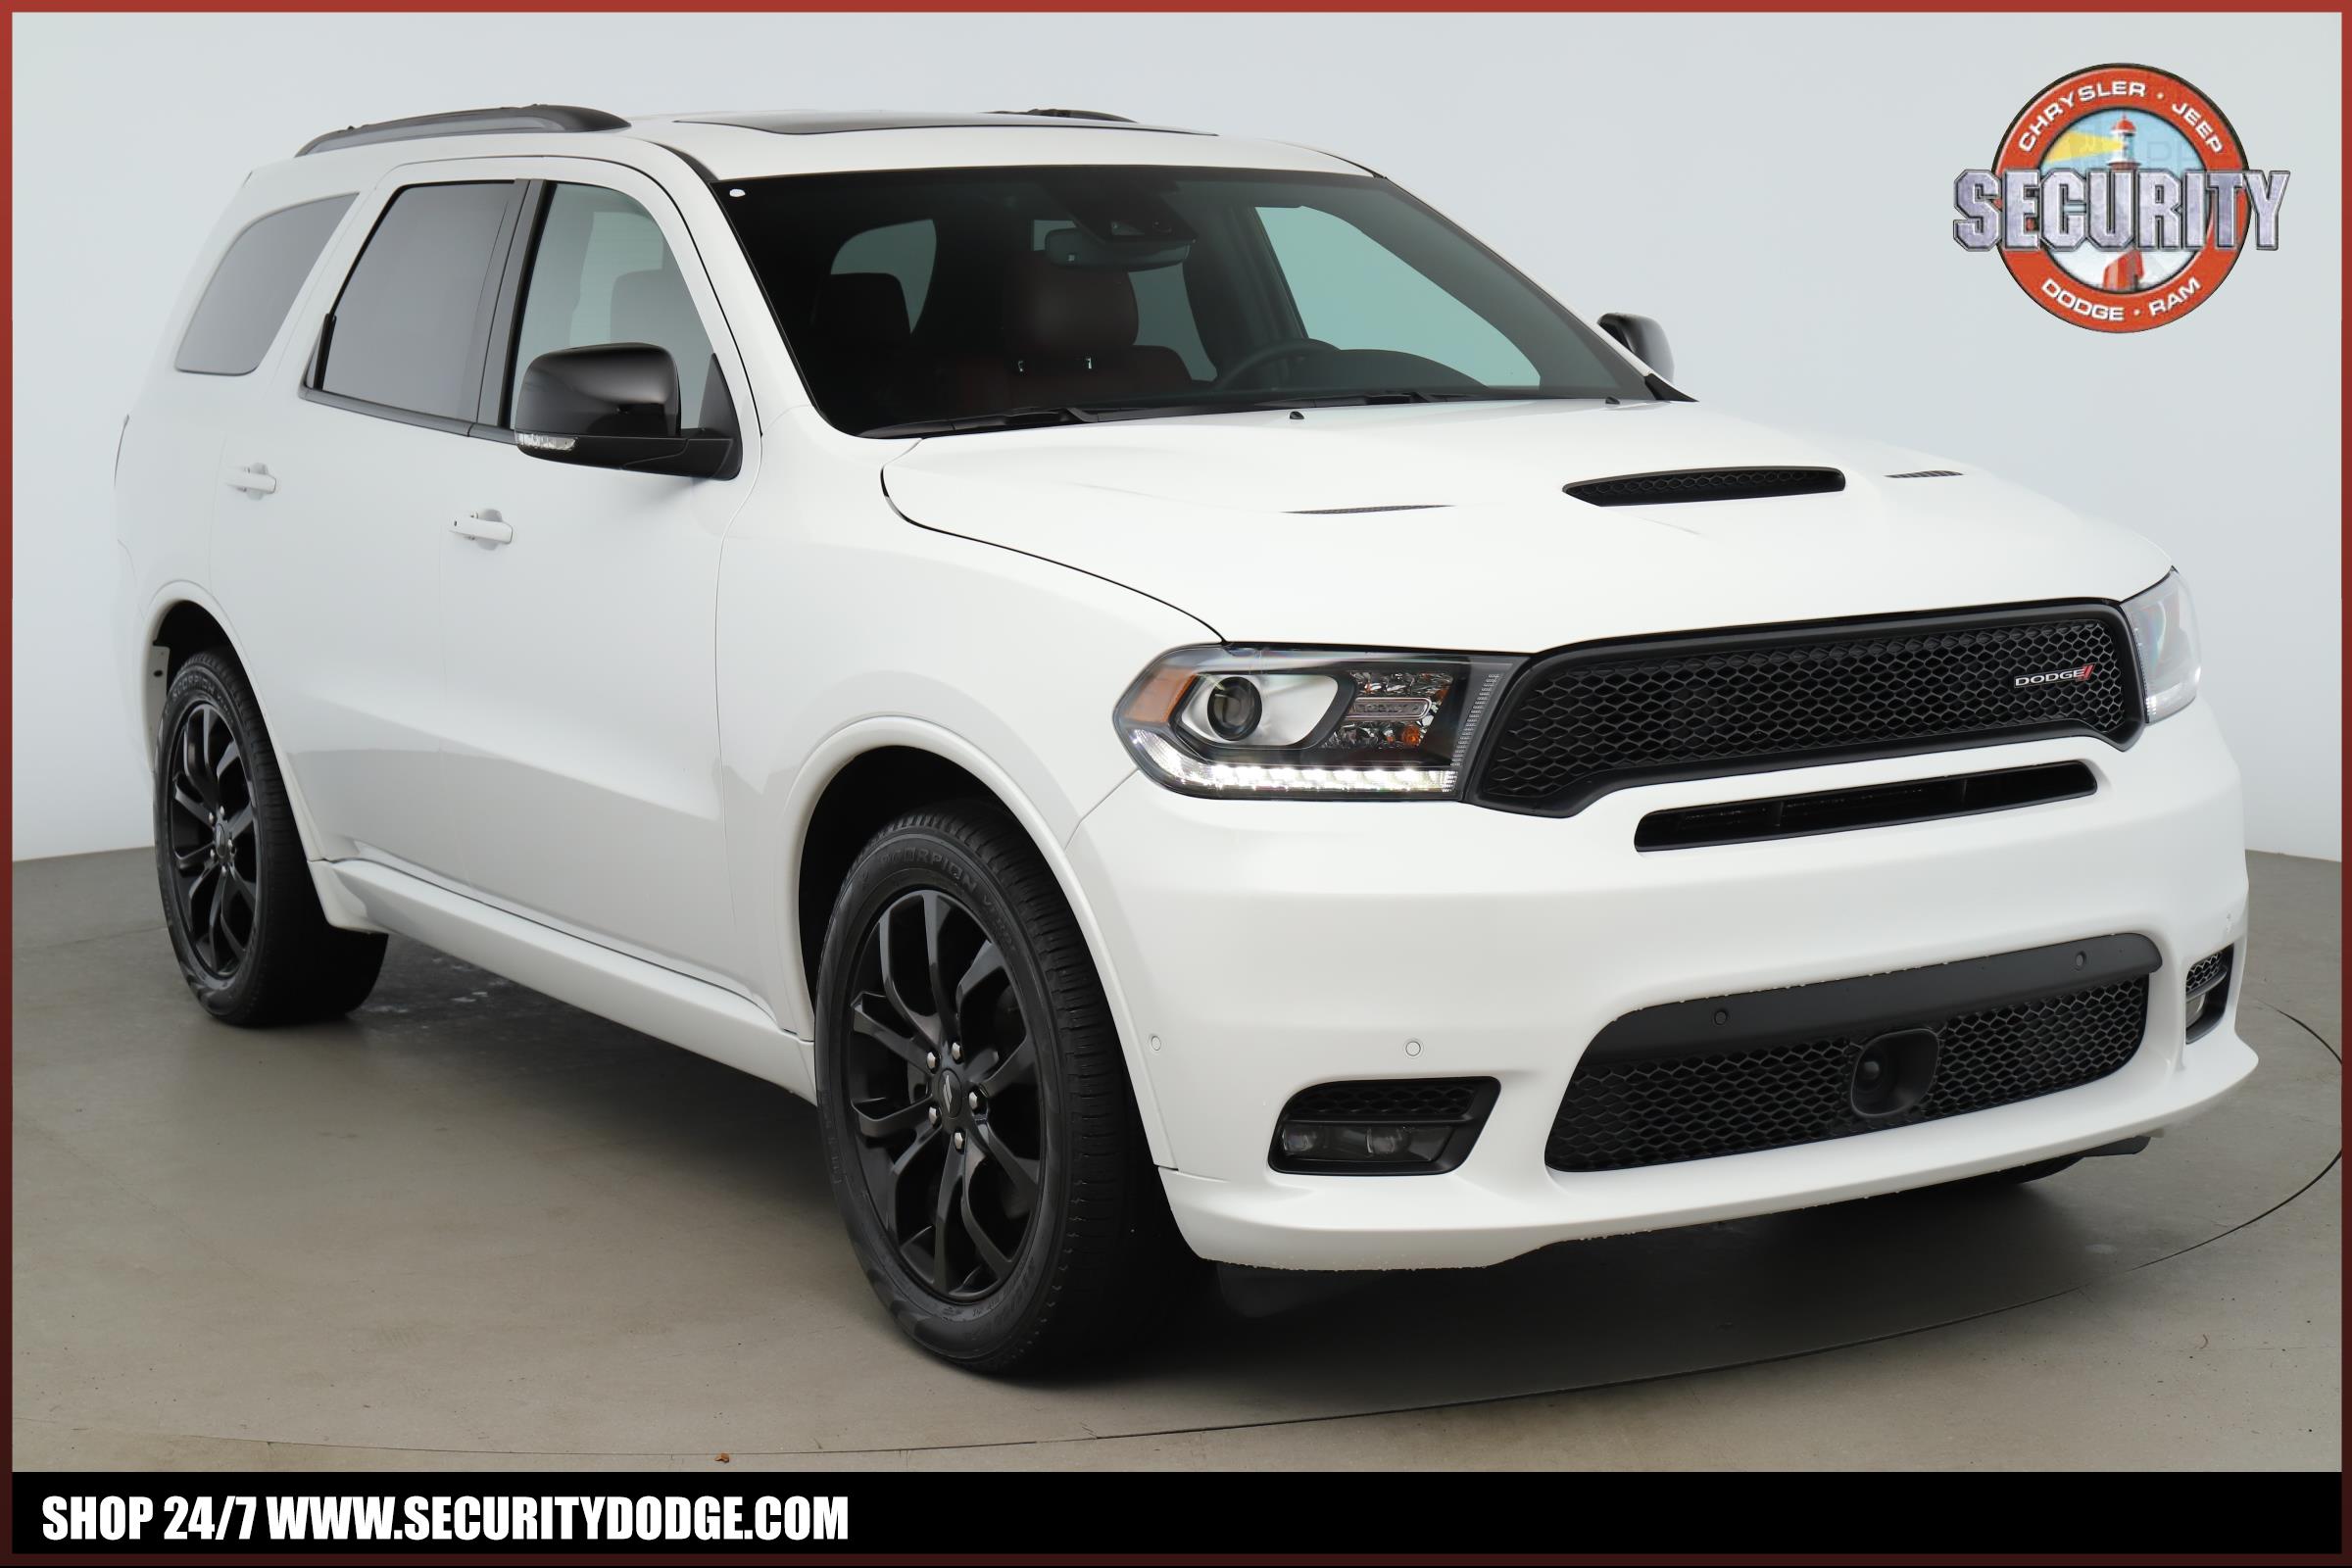 Certified Pre Owned 2019 Dodge Durango R T Blacktop 4x4 With Navigation Awd